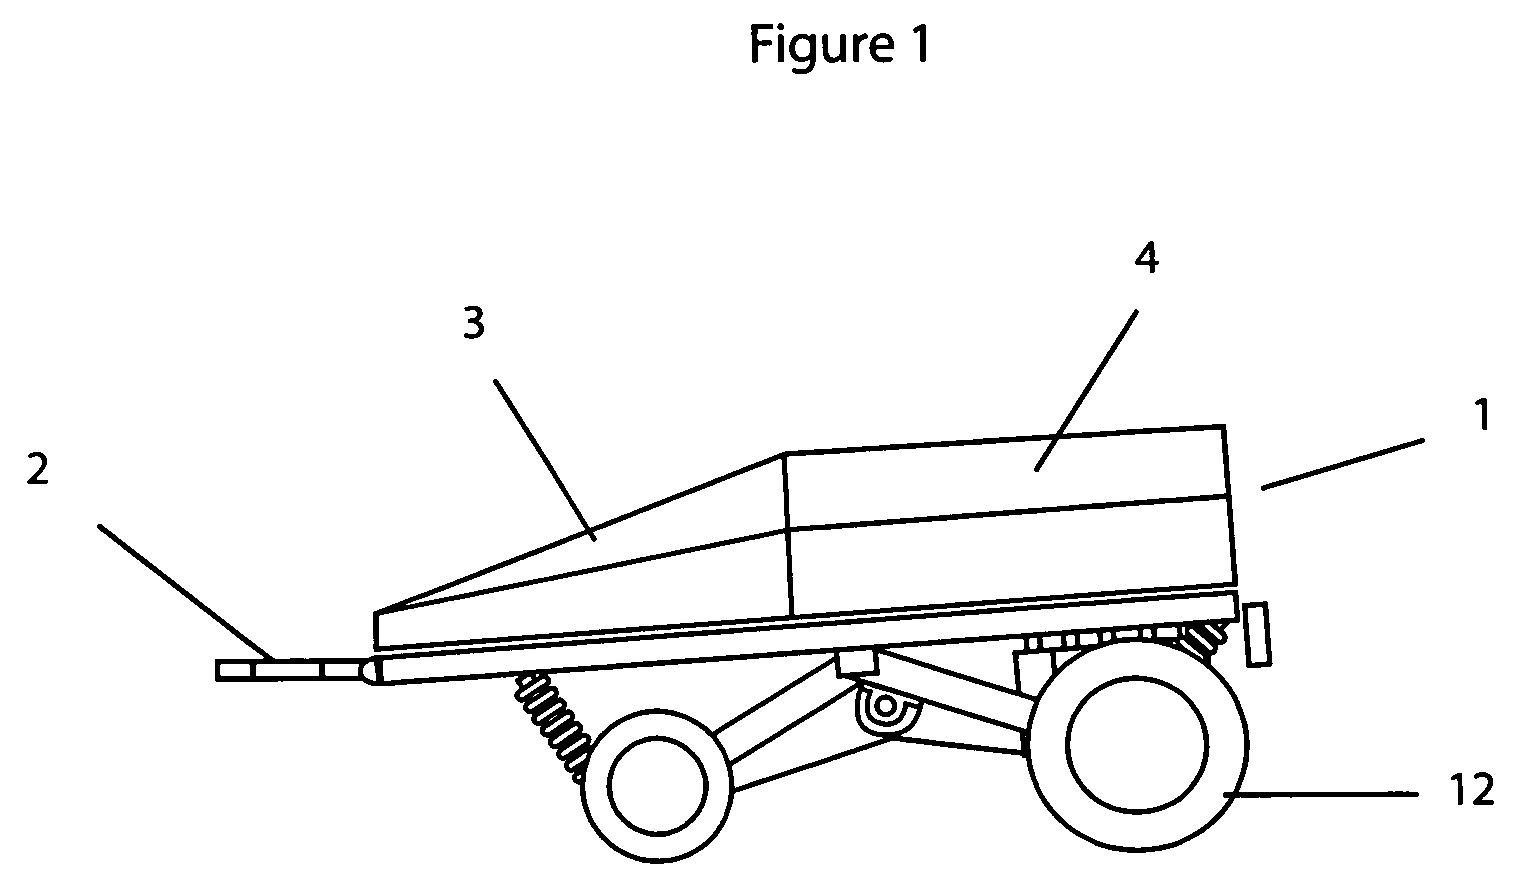 Dynamic friction testing vehicle to measure fluid drag and rolling friction